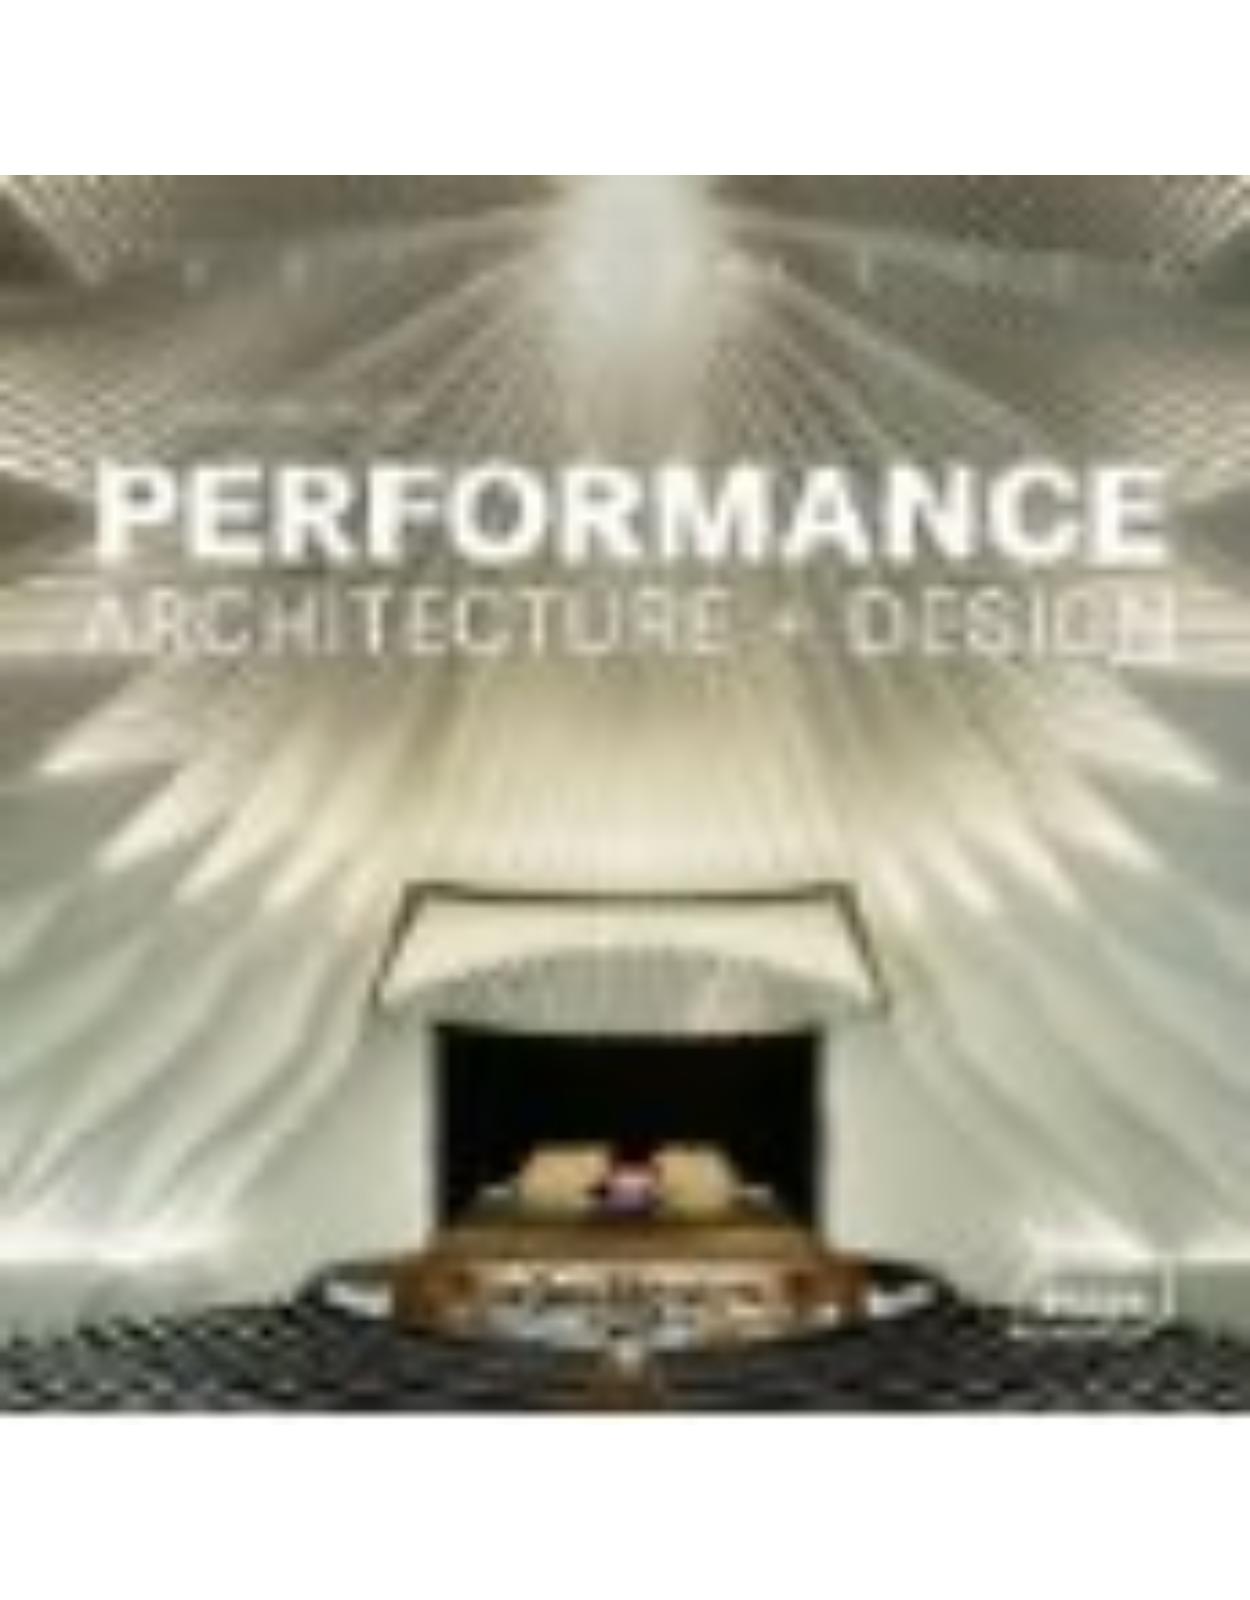 Masterpieces:Performance Architecture and Design